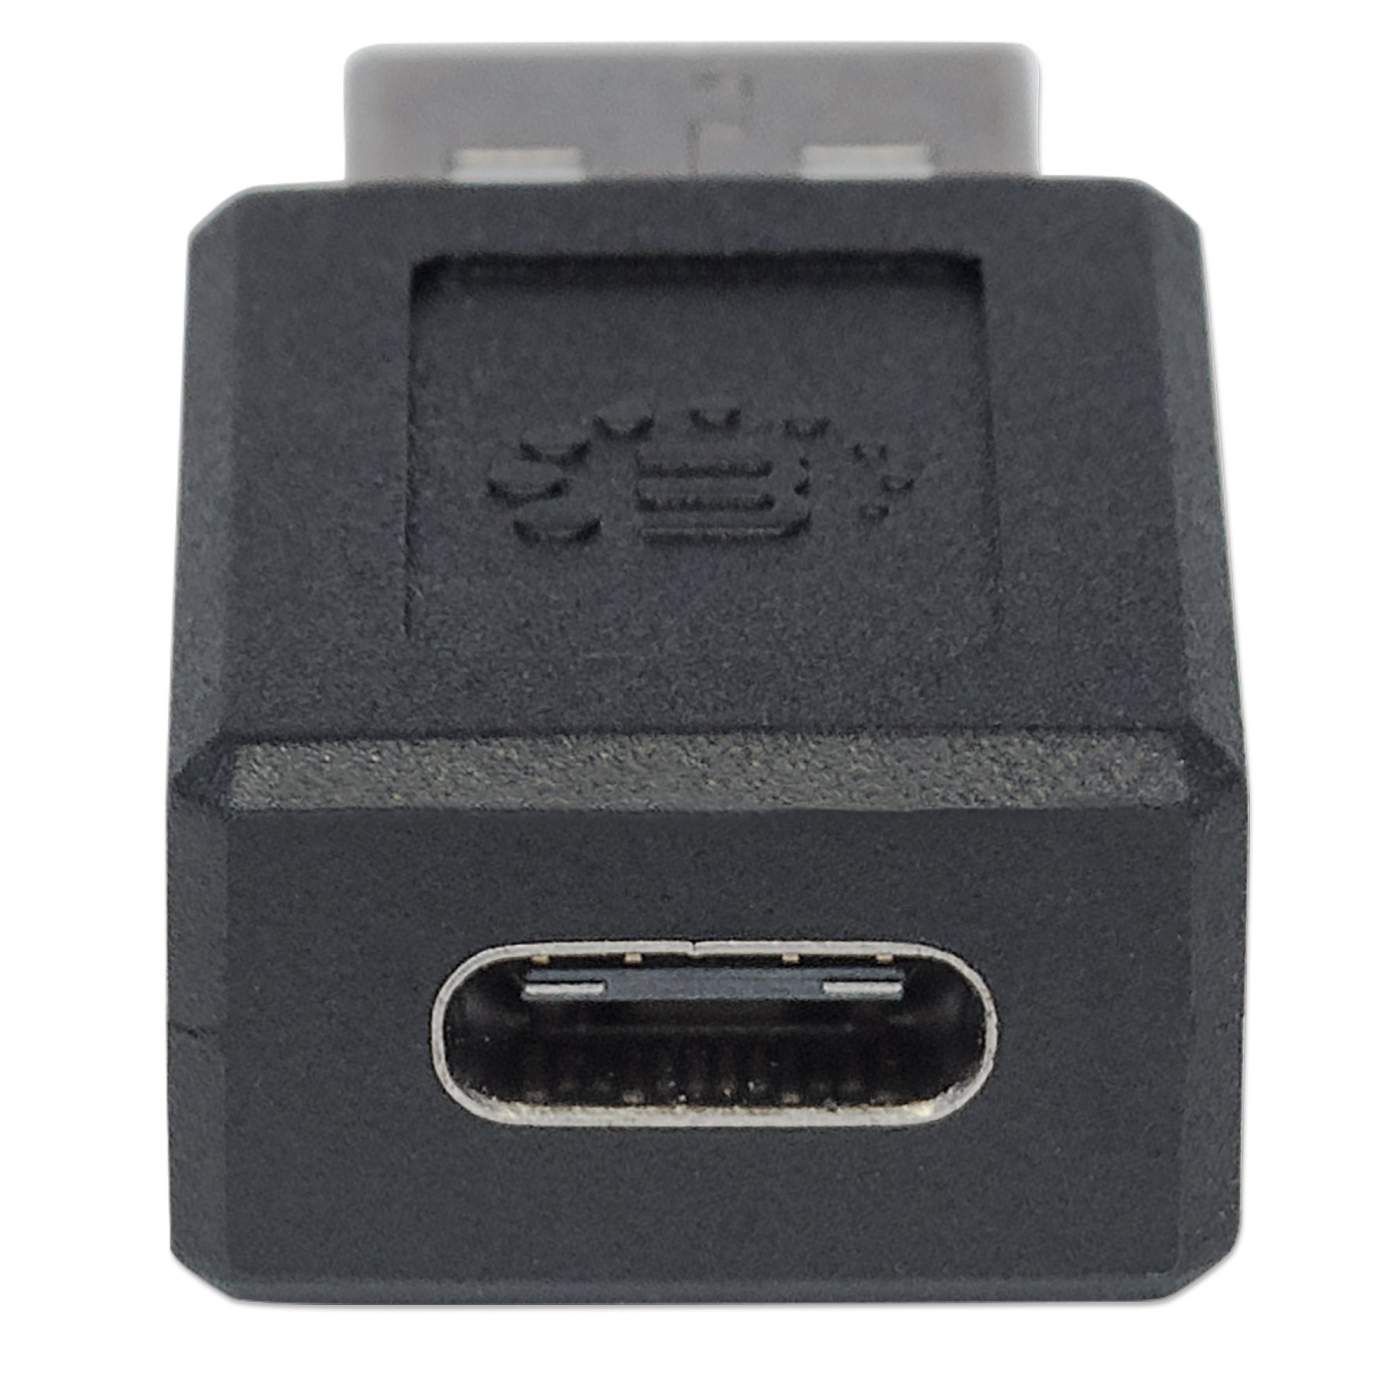 USB 2.0 Type-C to Type-A Adapter Image 7